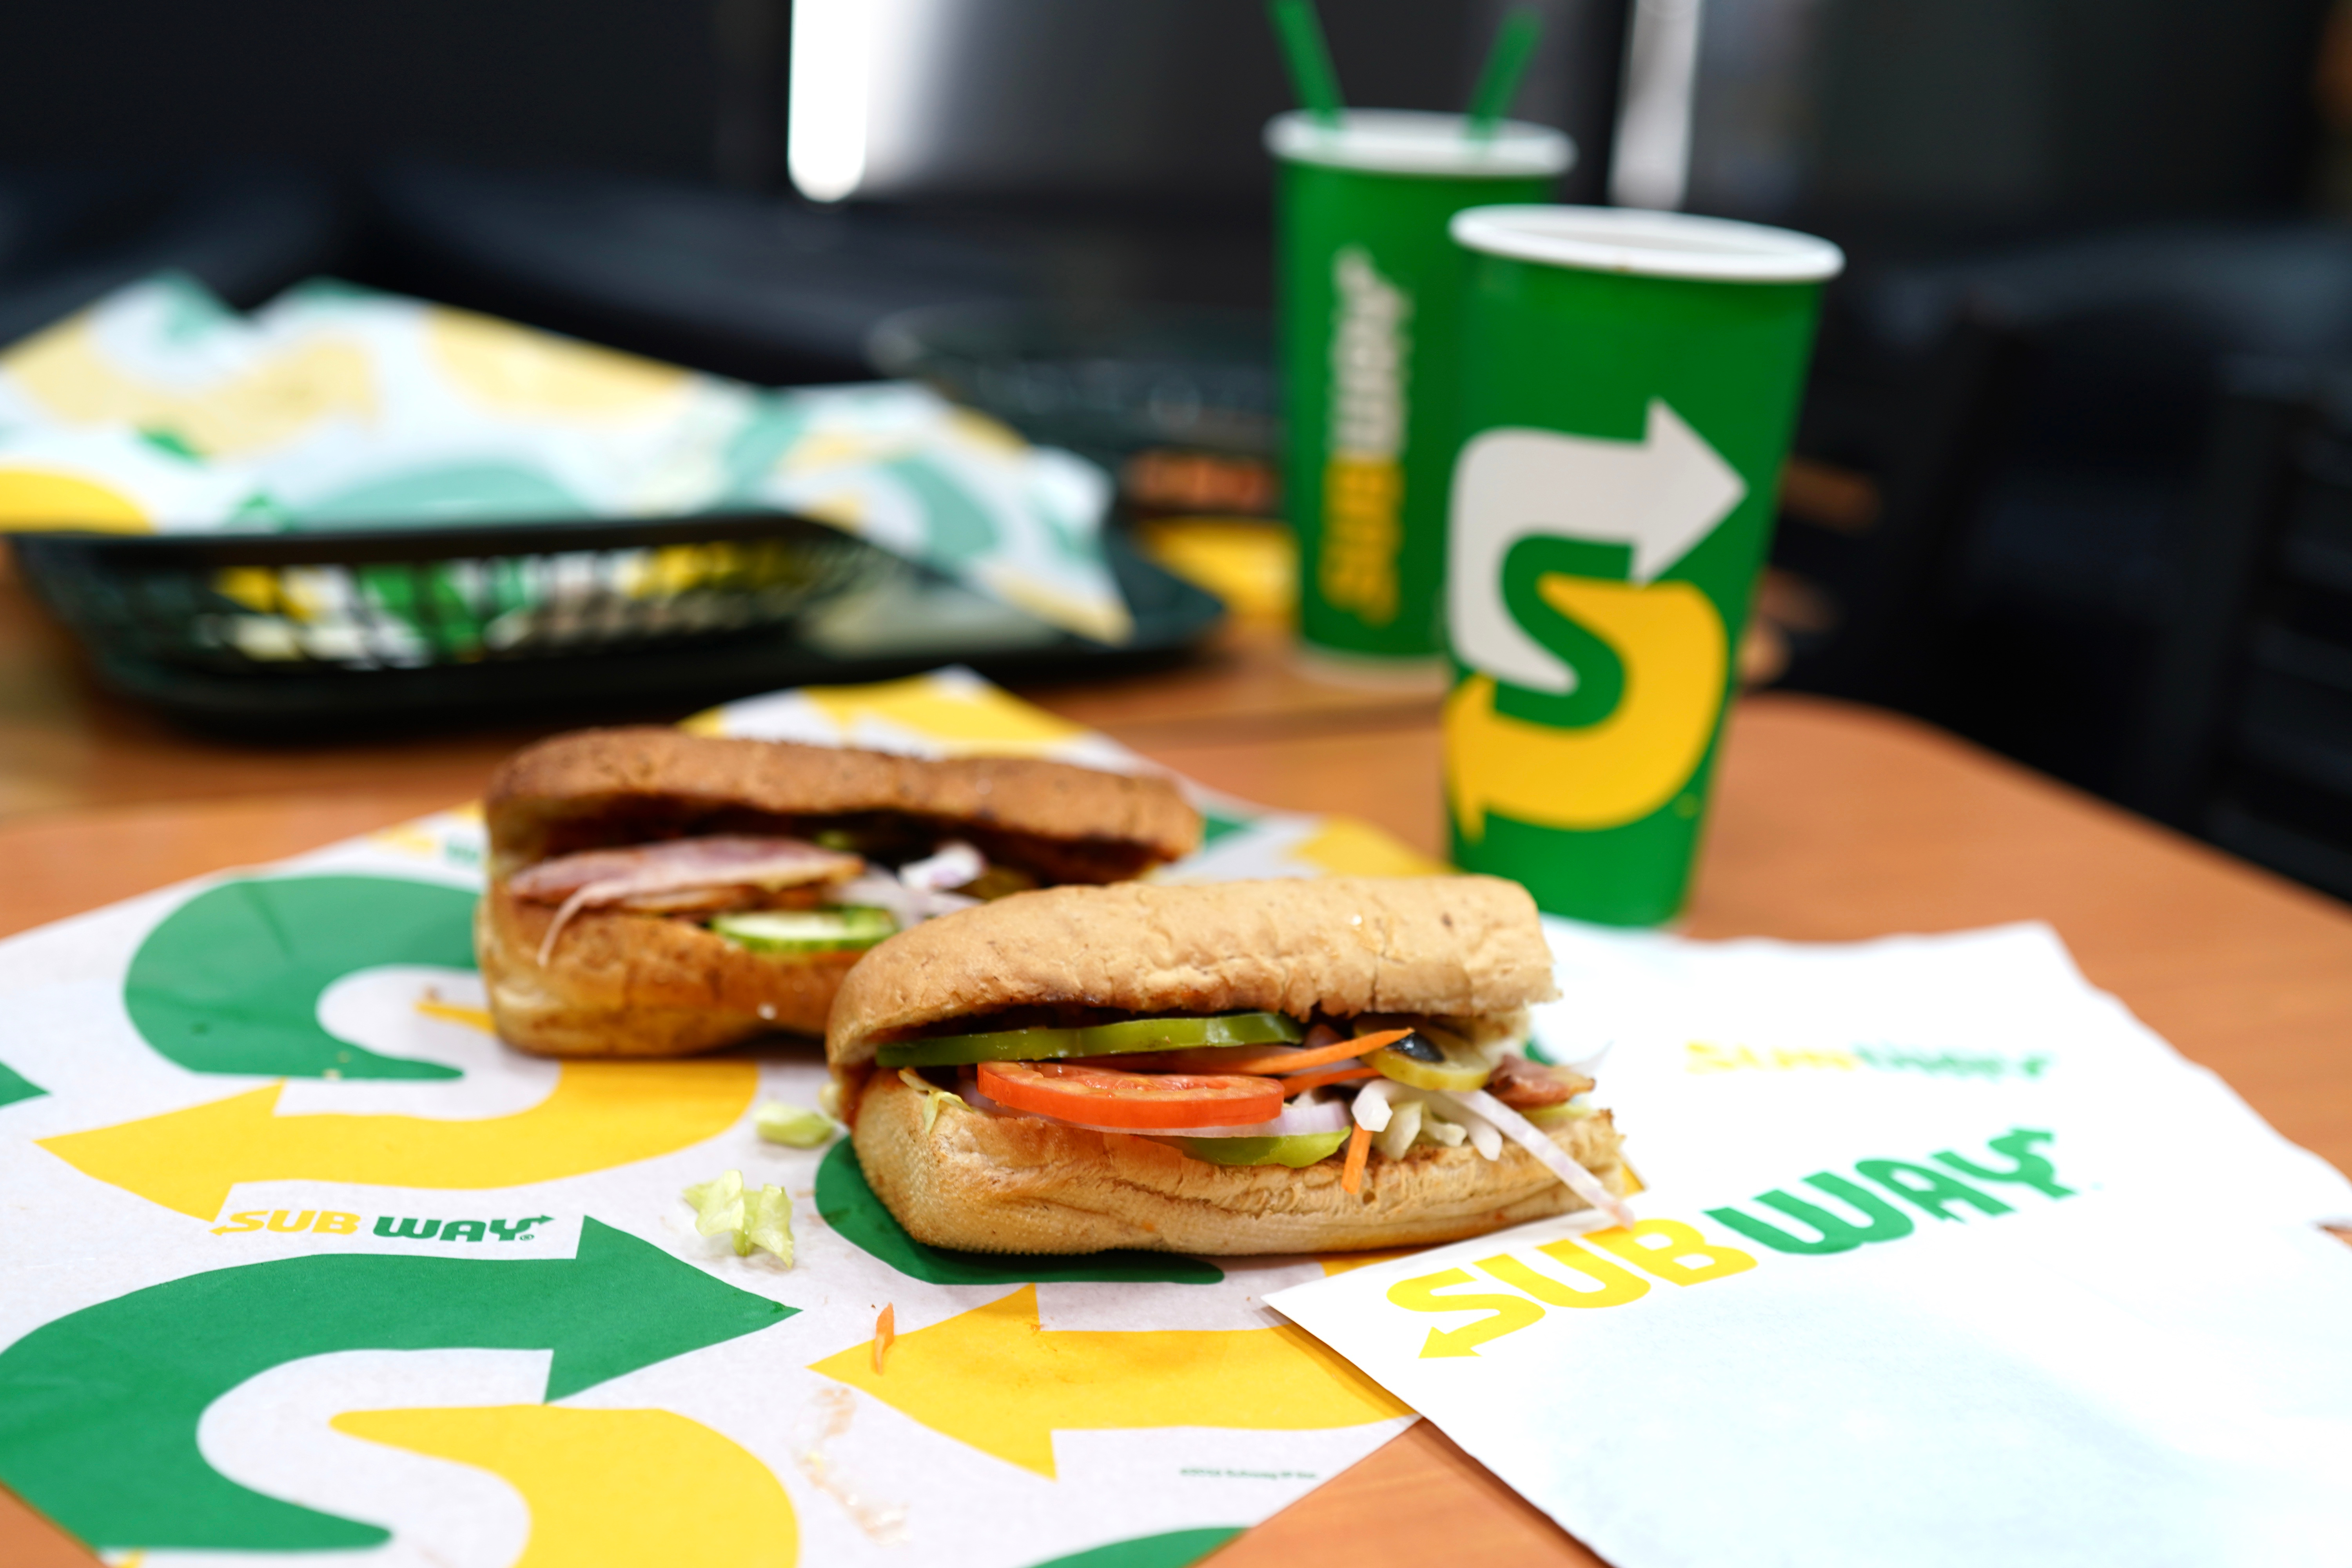 Two sandwiches on Subway branded paper